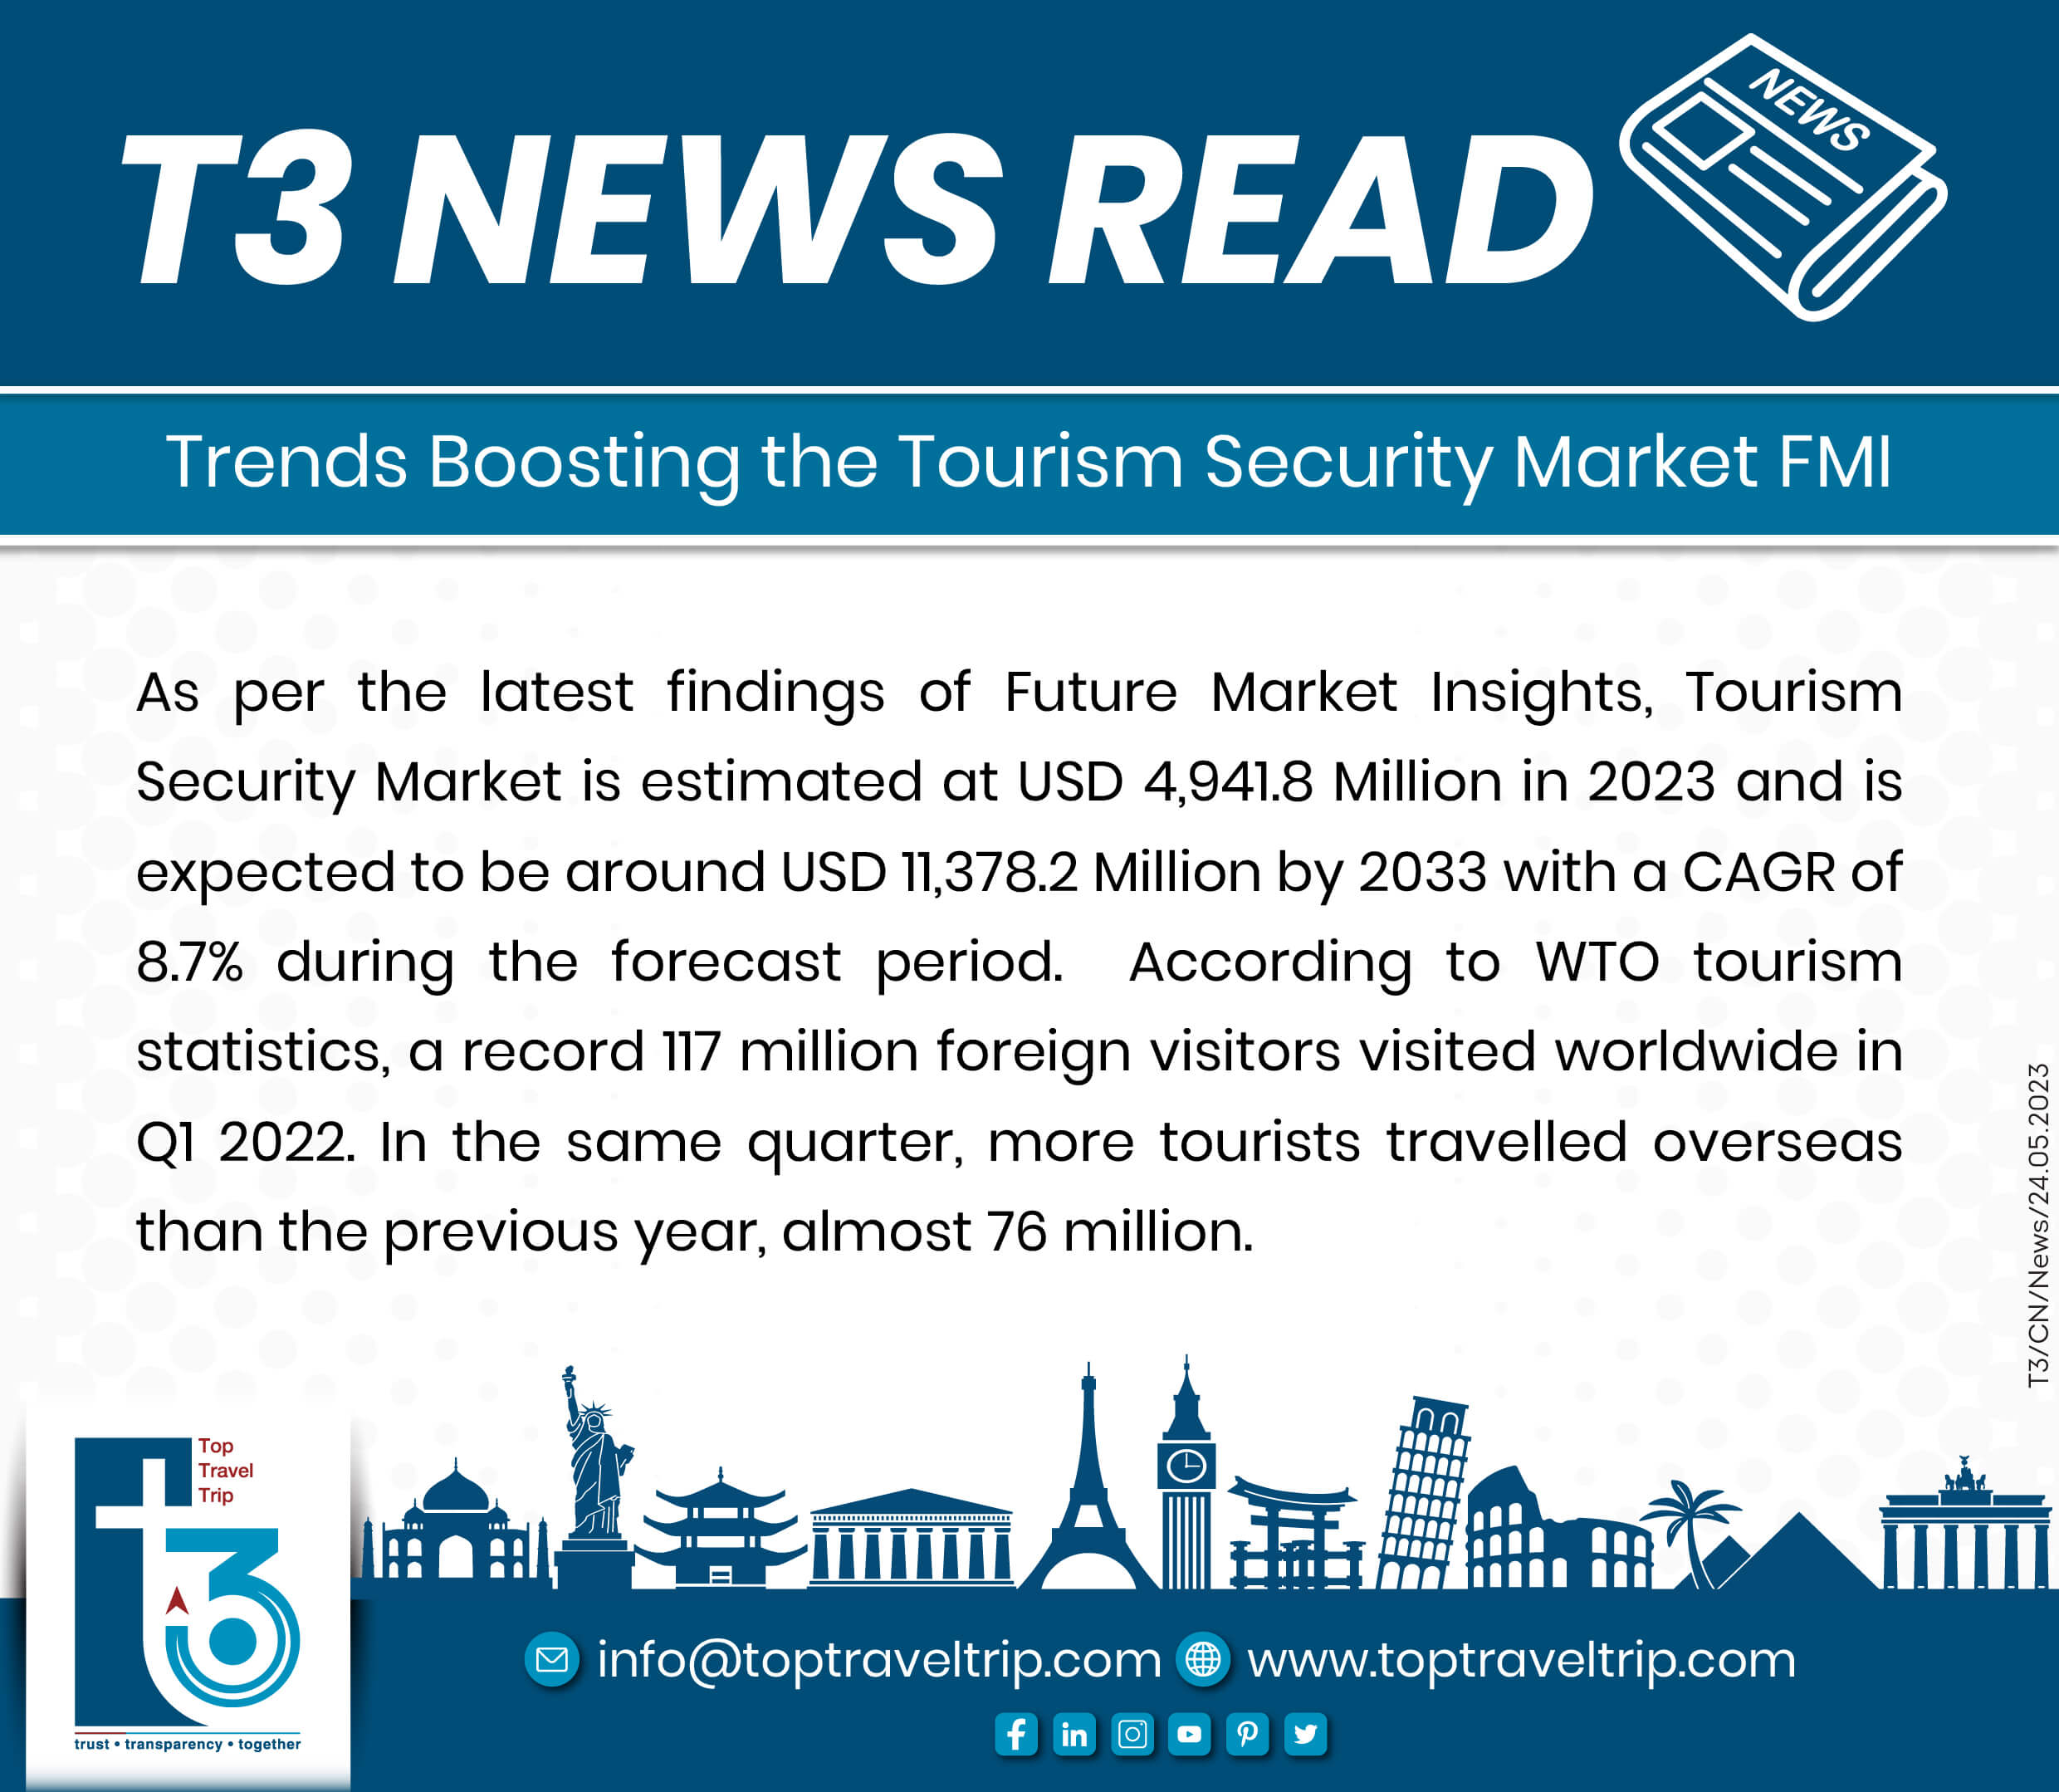 T3-CN_Trends-Boosting-the-Tourism-Security-Market-FMI-01